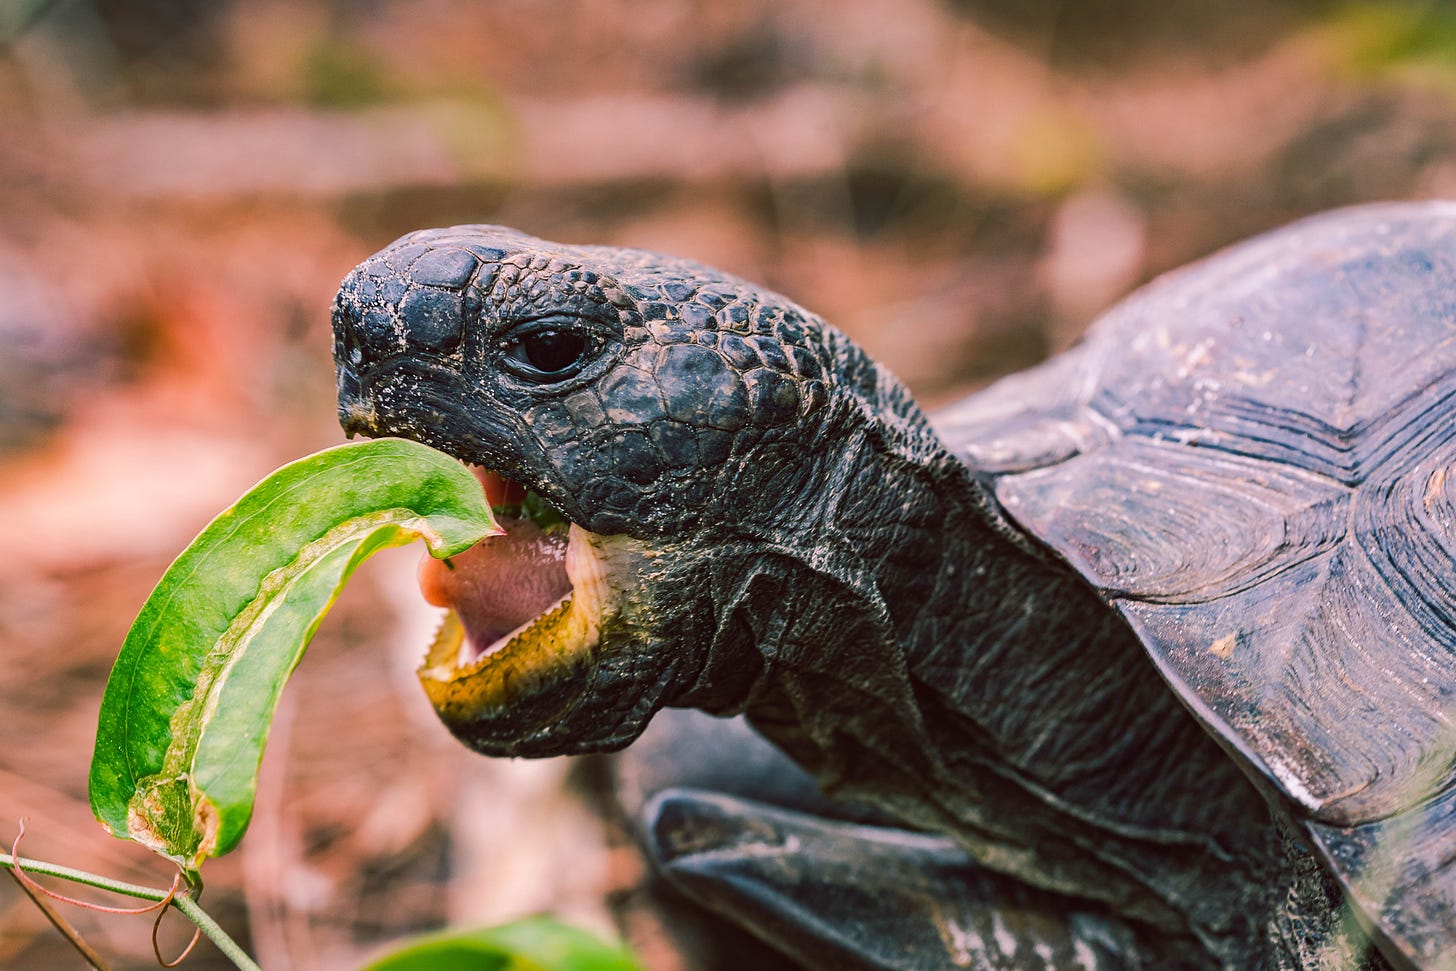 Close-up of a turtle opening its mouth widely to bite a green leaf.